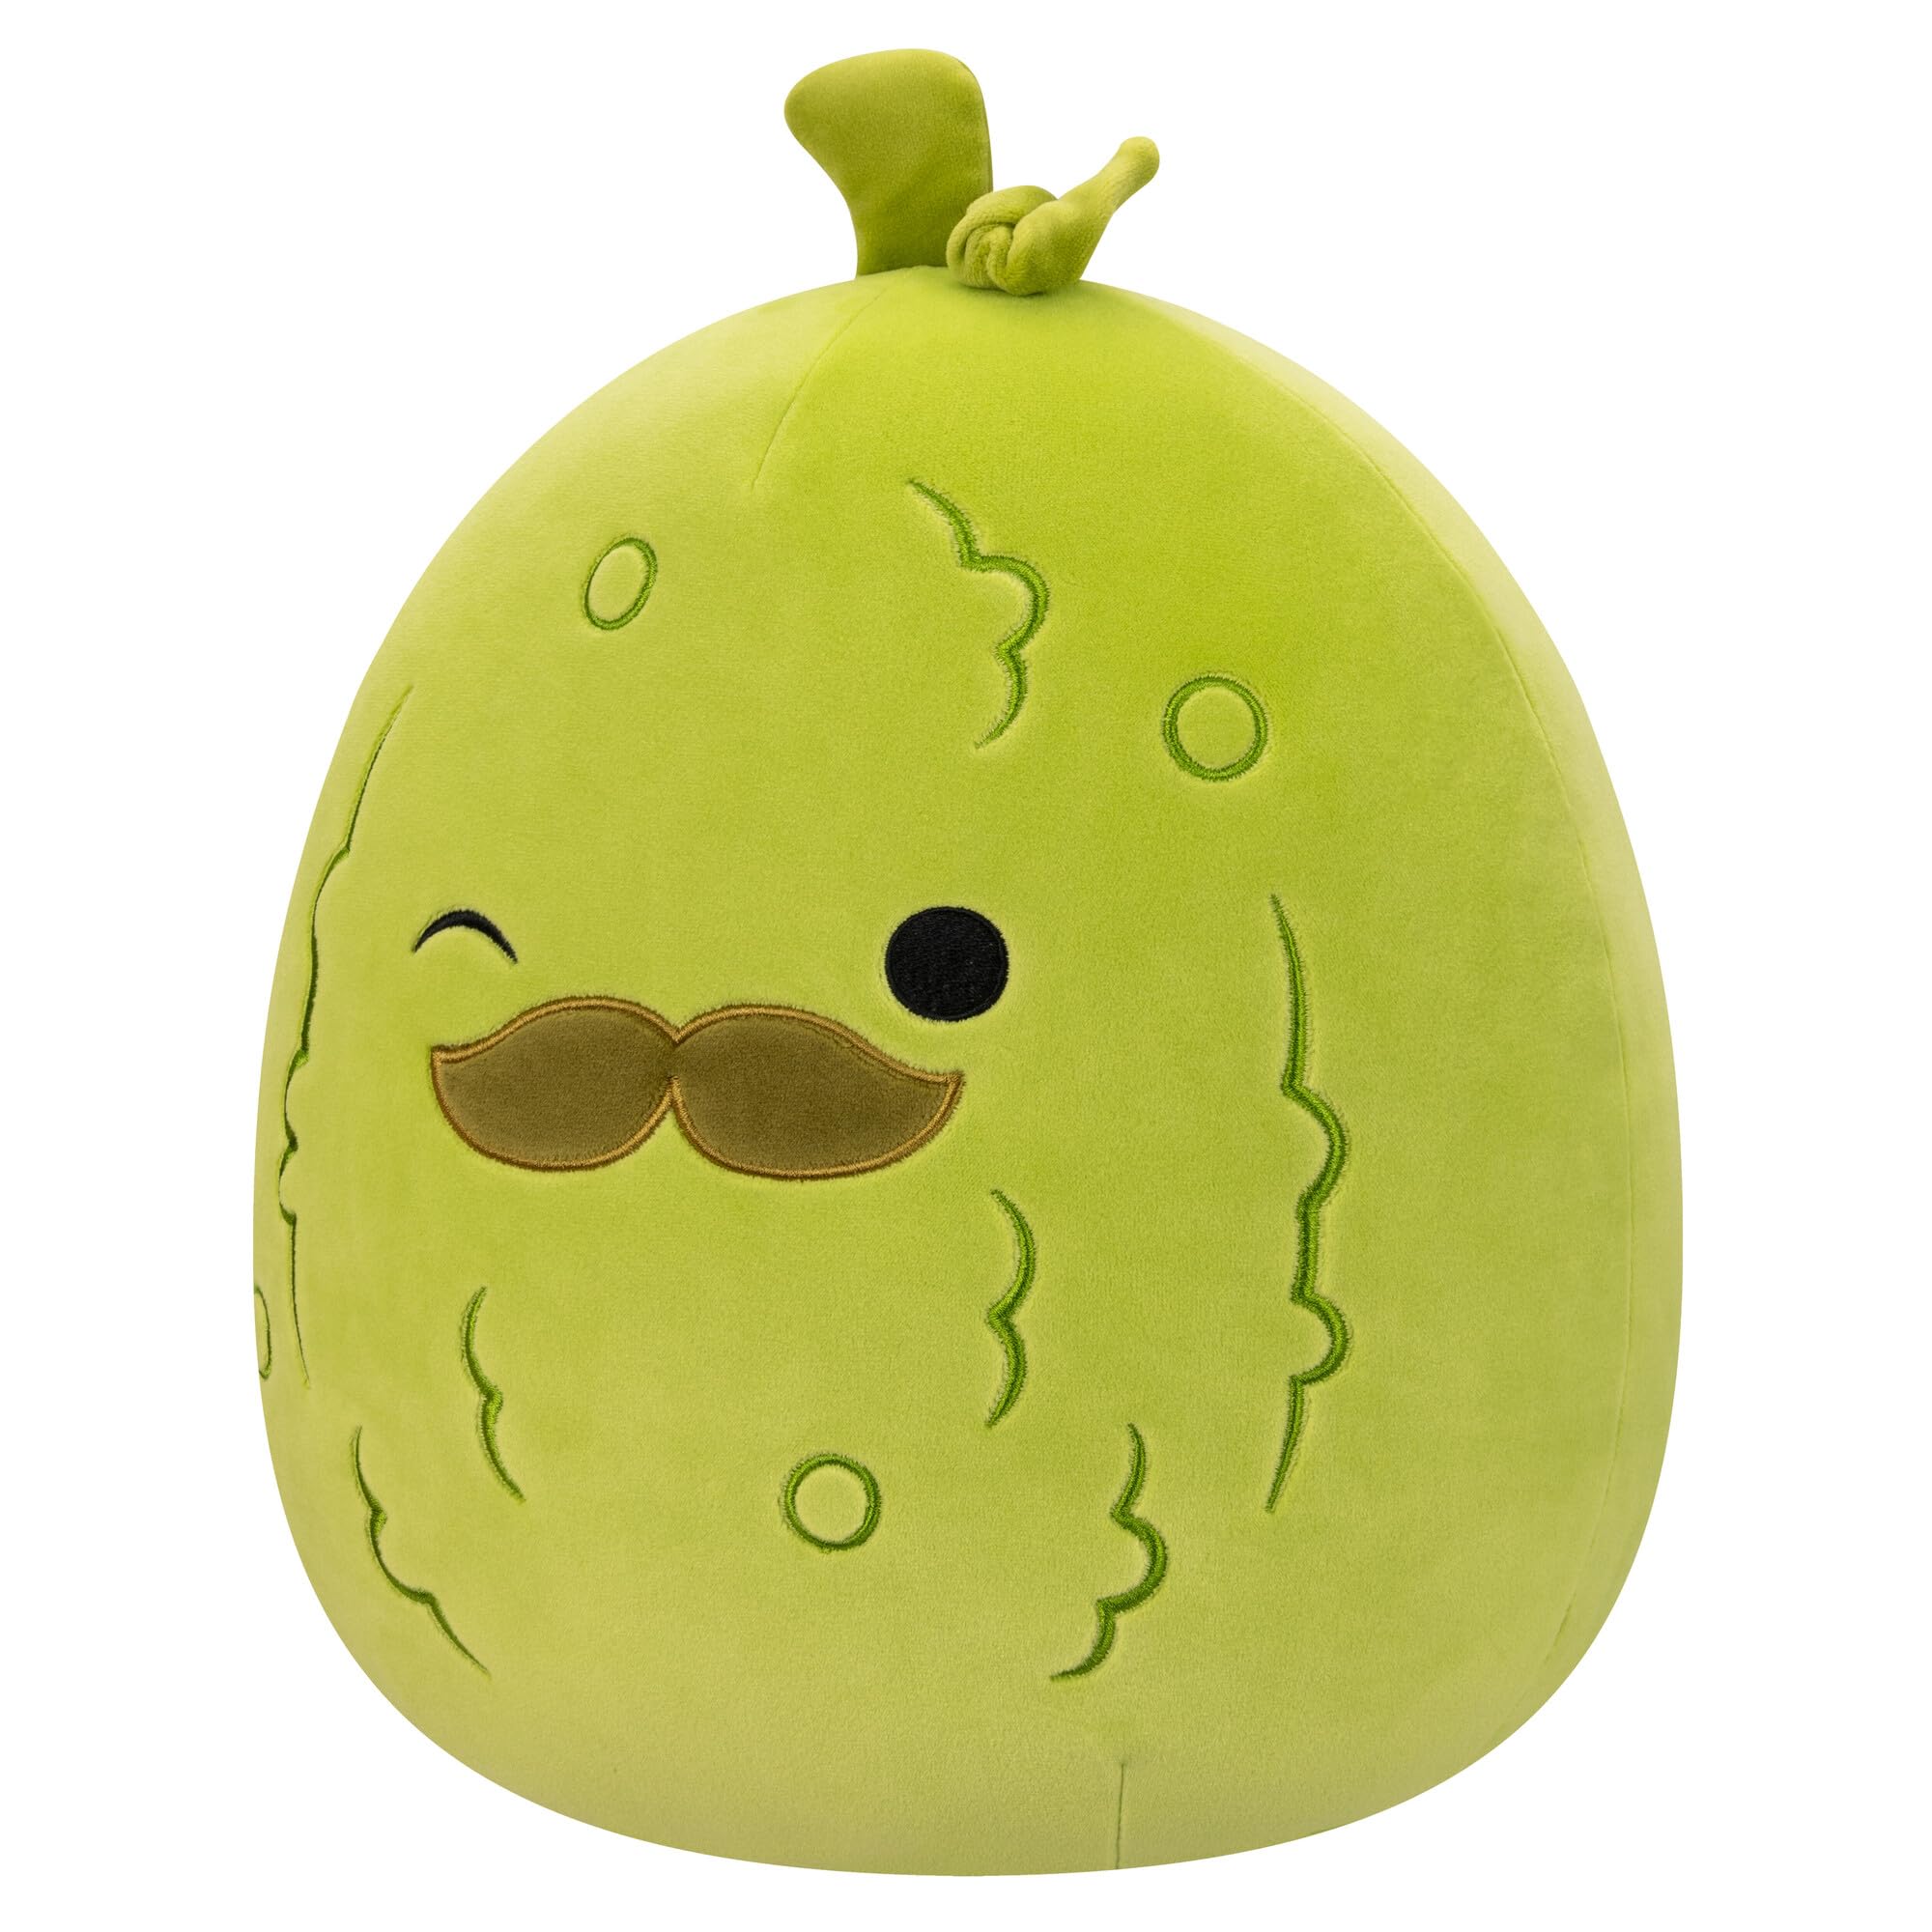 Squishmallows Original 12-Inch Charles Pickle with Mustache - Medium-Sized Ultrasoft Official Jazwares Plush